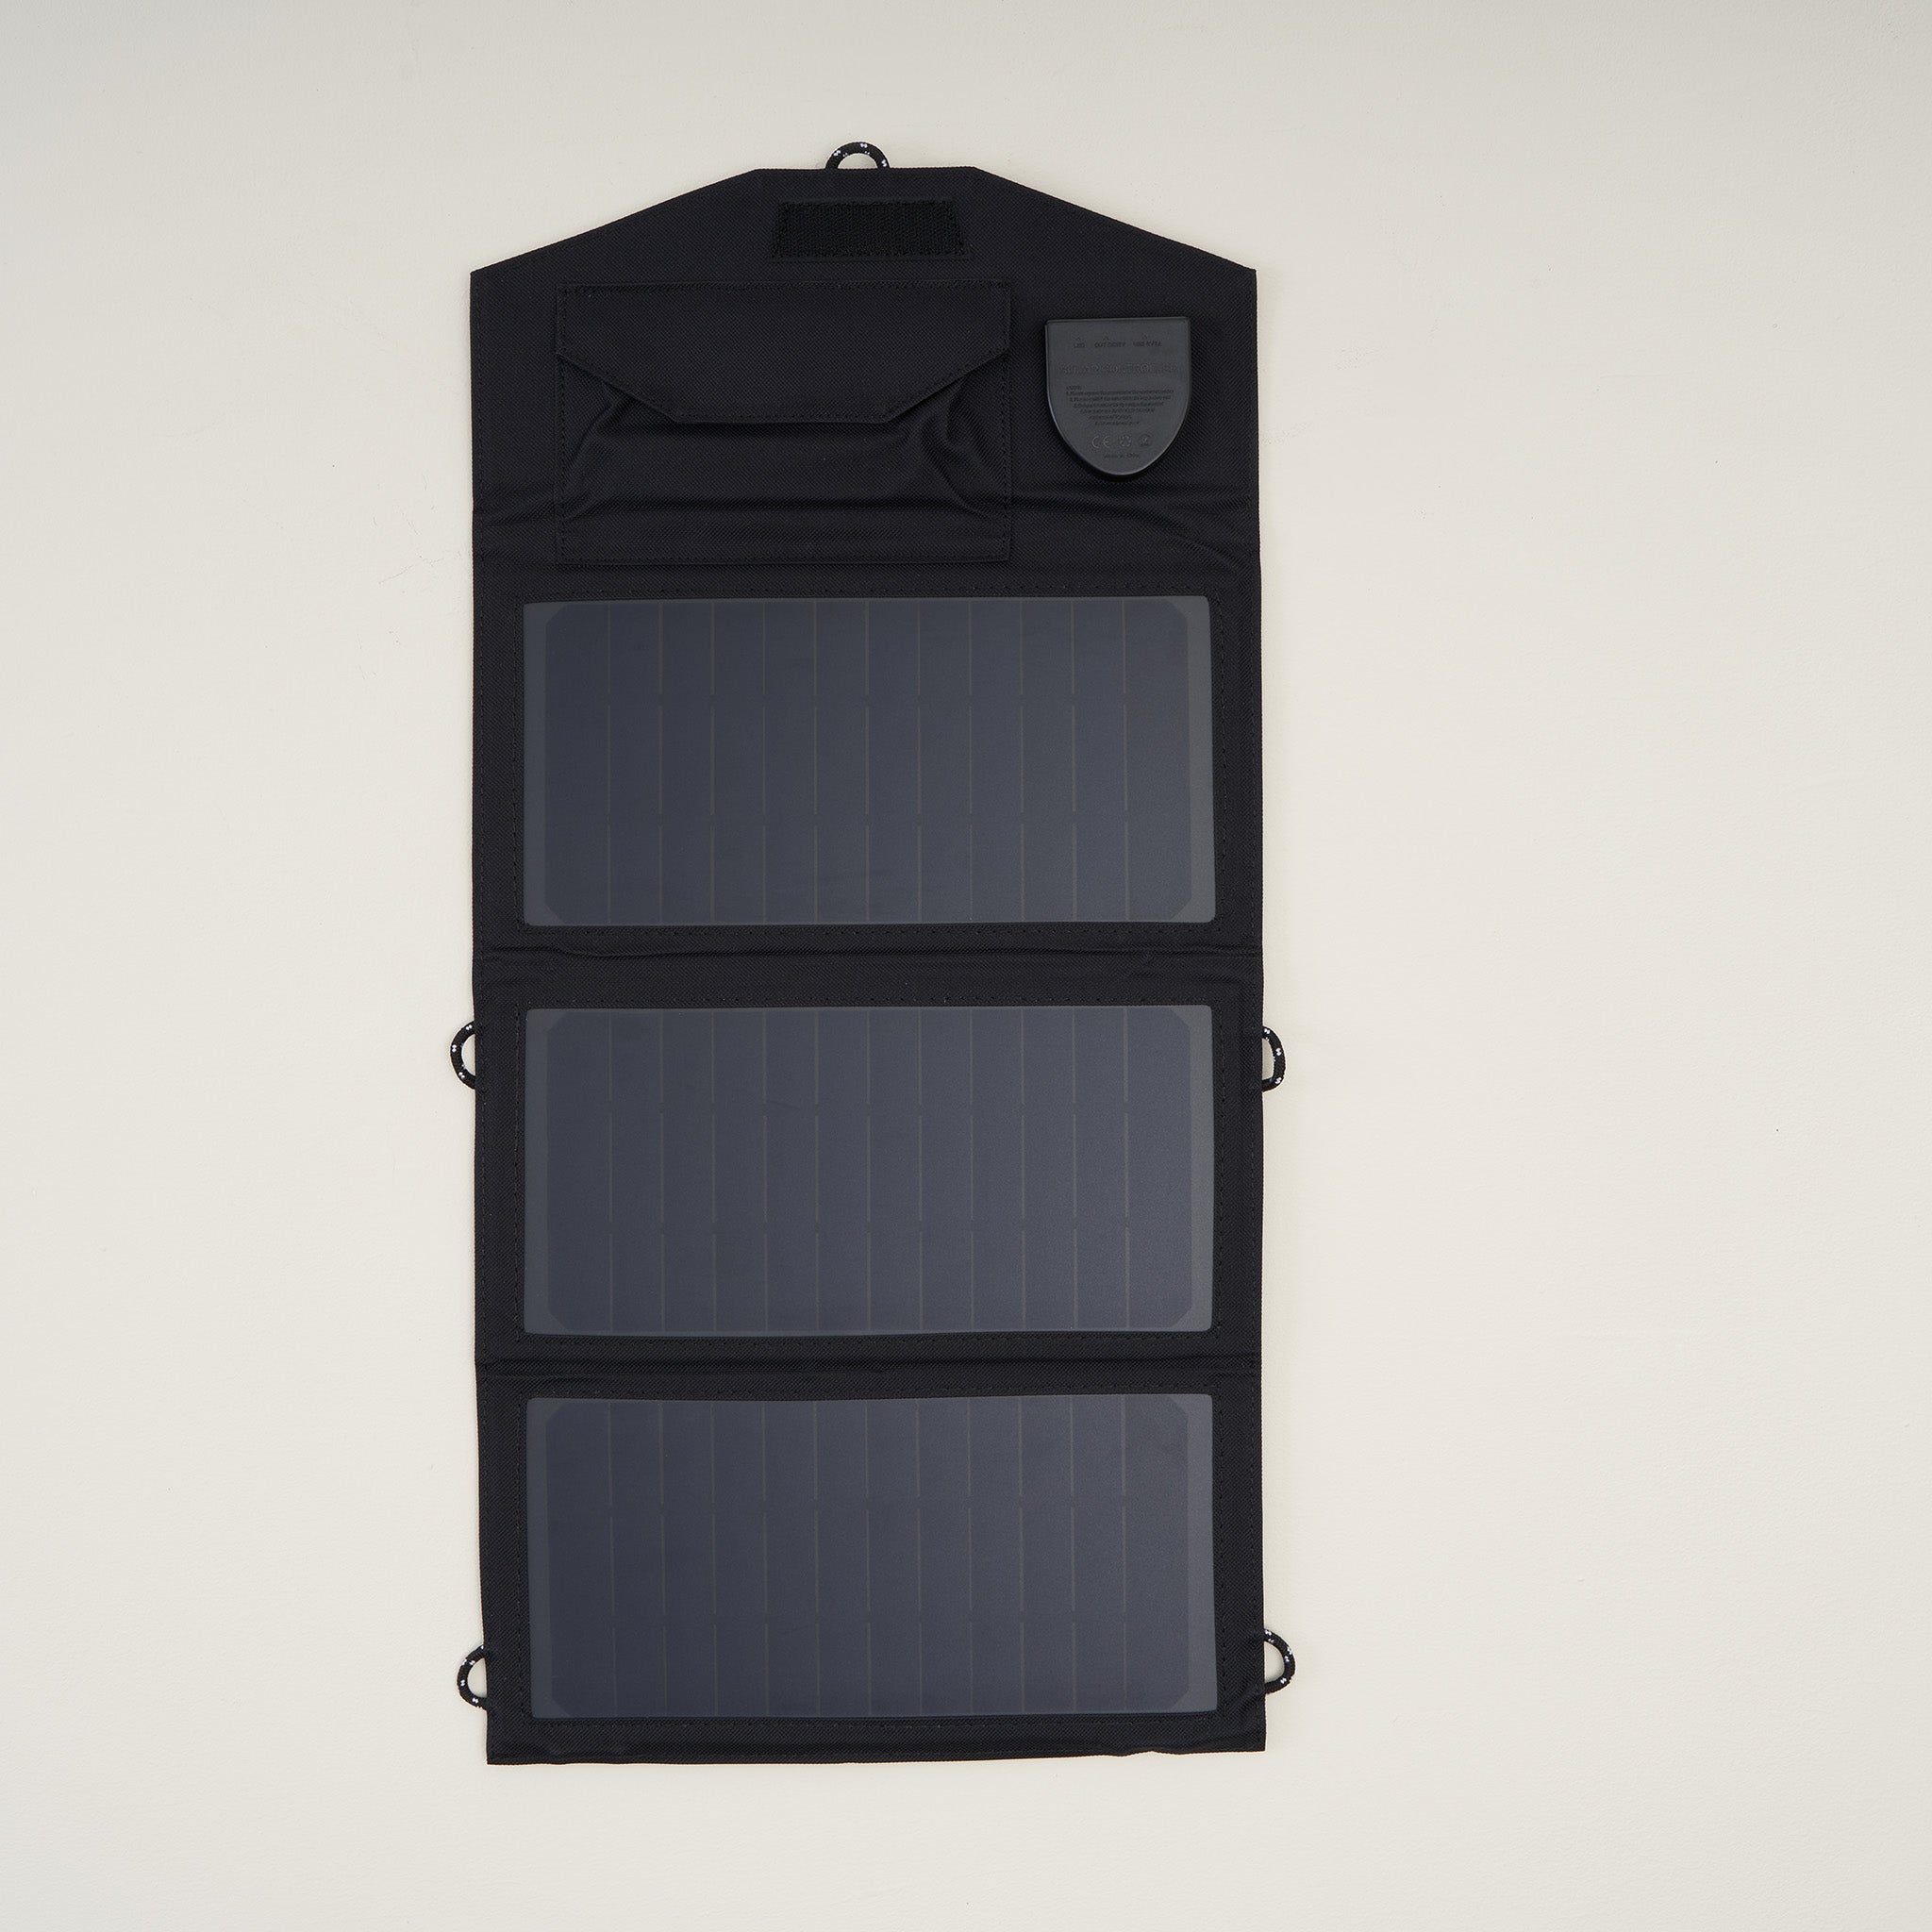 Flexible - 21W Folding Solar Panel with Car Battery Charger